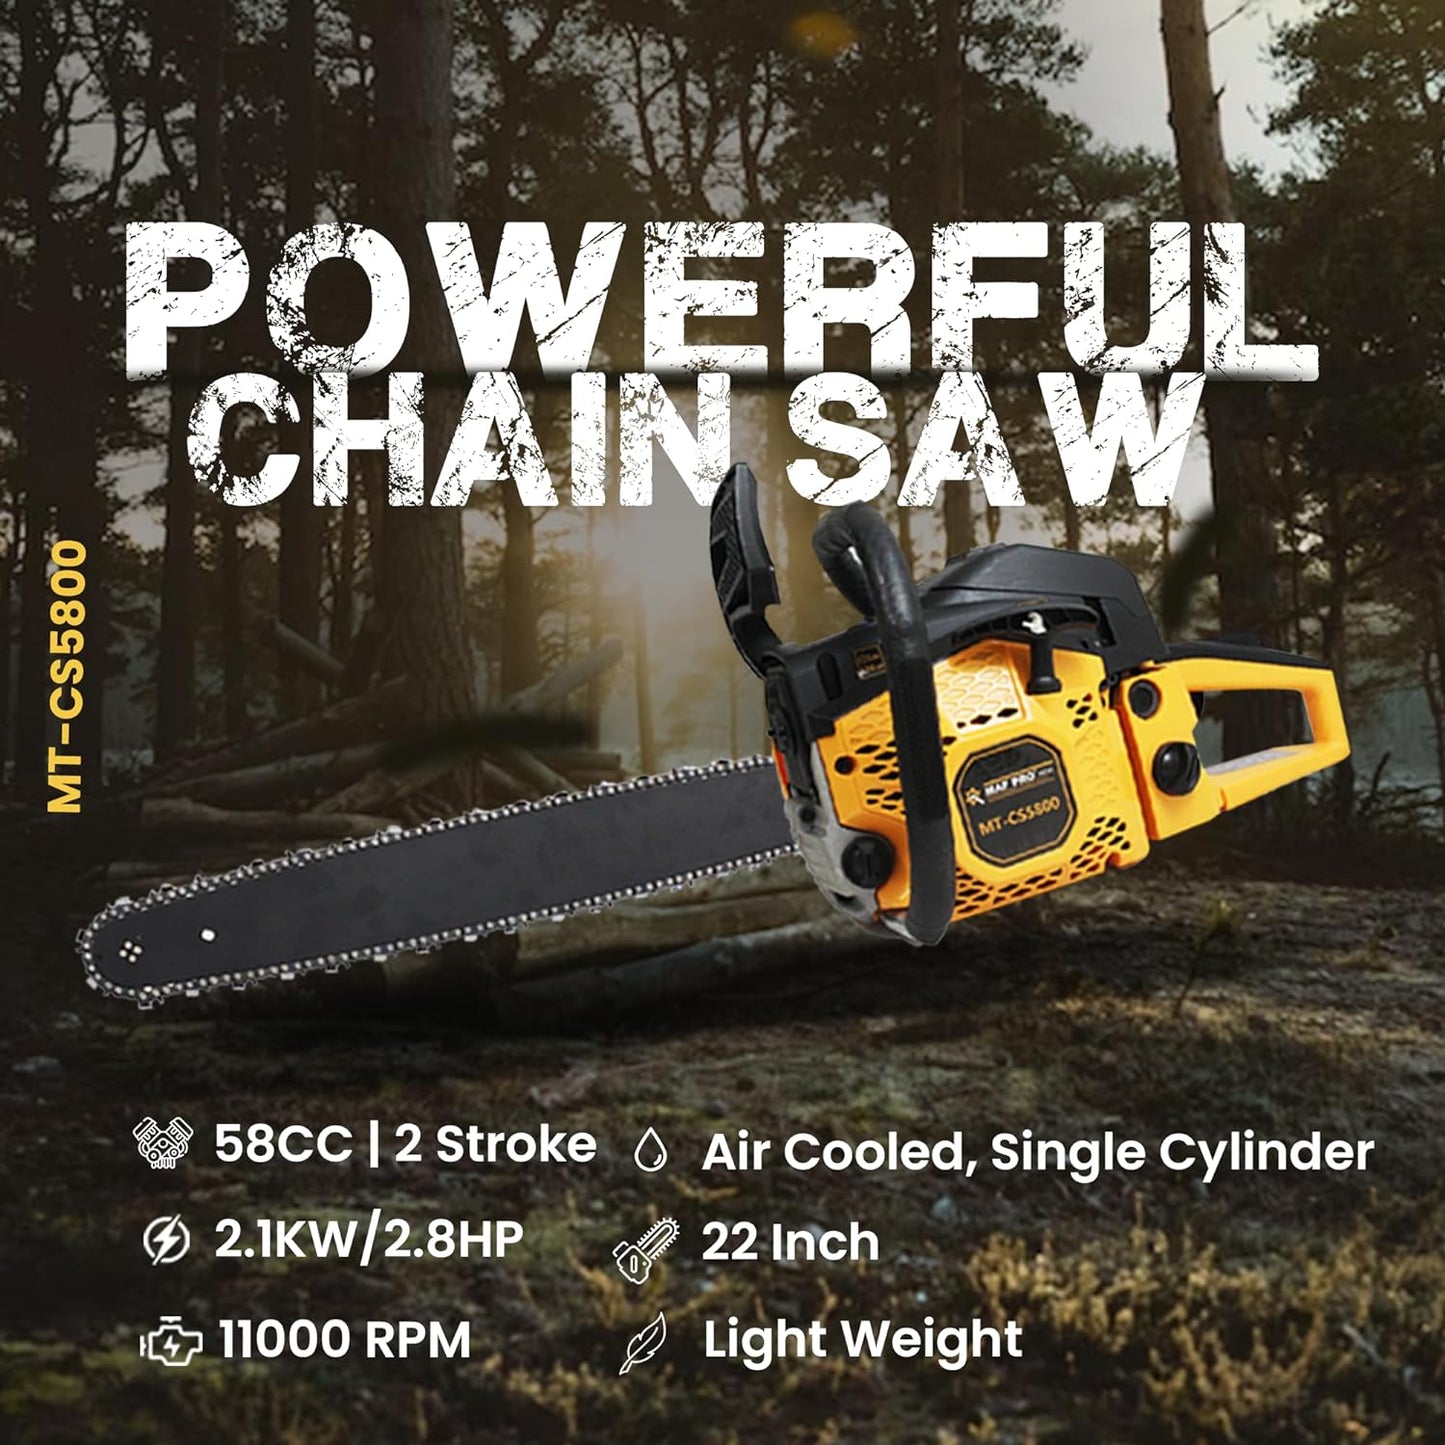 MAF PRO MT-CS5800, 22" 58CC Powerful 2 Stroke Handheld Petrol Chain Saw, Woodcutting Saw for Farm, Garden and Ranch with Tool Kit